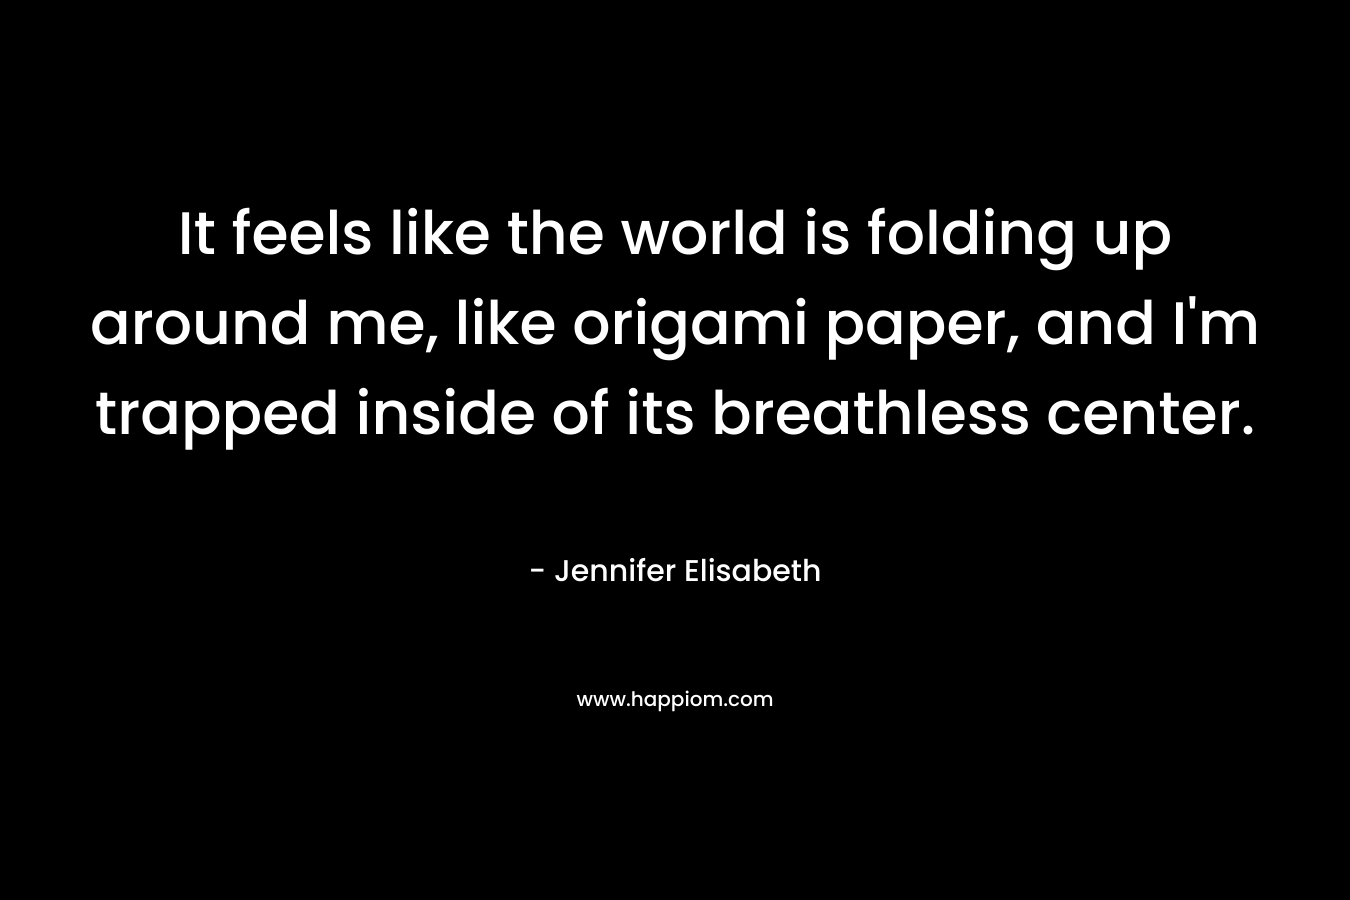 It feels like the world is folding up around me, like origami paper, and I'm trapped inside of its breathless center.